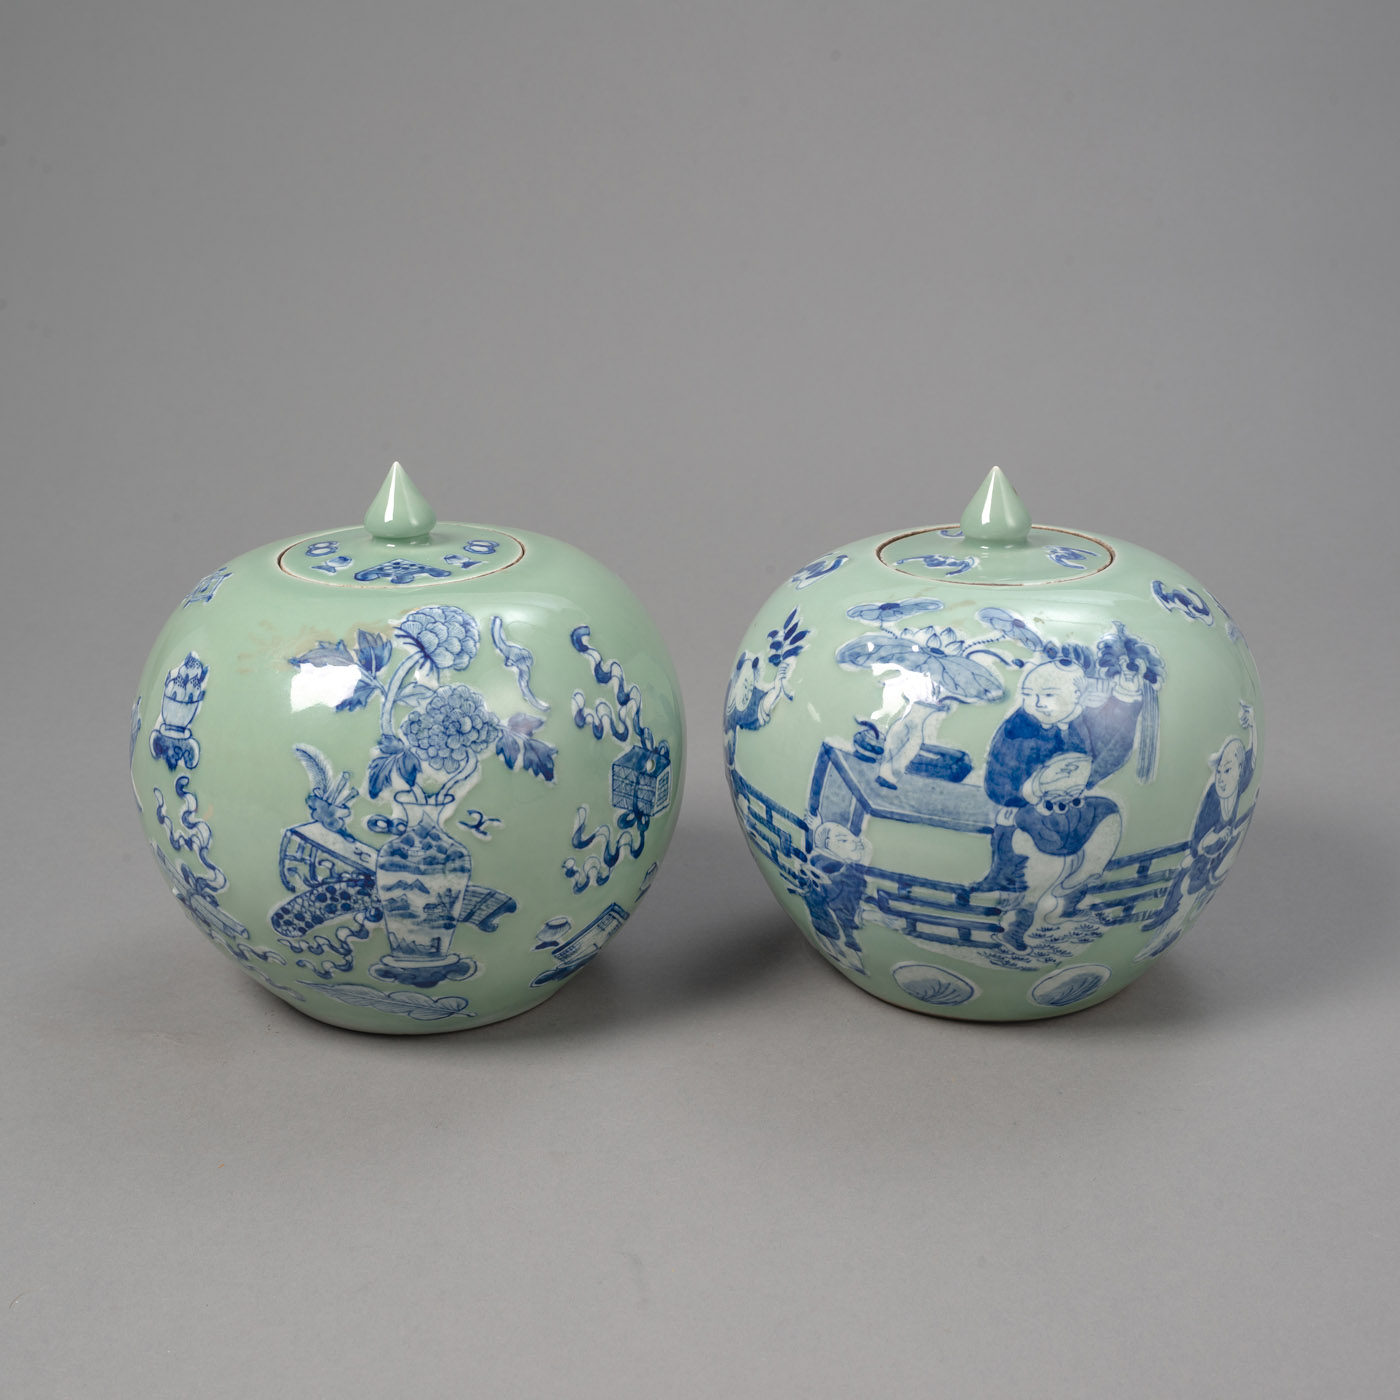 <b>TWO PORCELAIN CELADON VASES AND COVERS DEPICTING PLAYING BOYS AND ANTIQUES IN UNDERGLAZE BLUE</b>